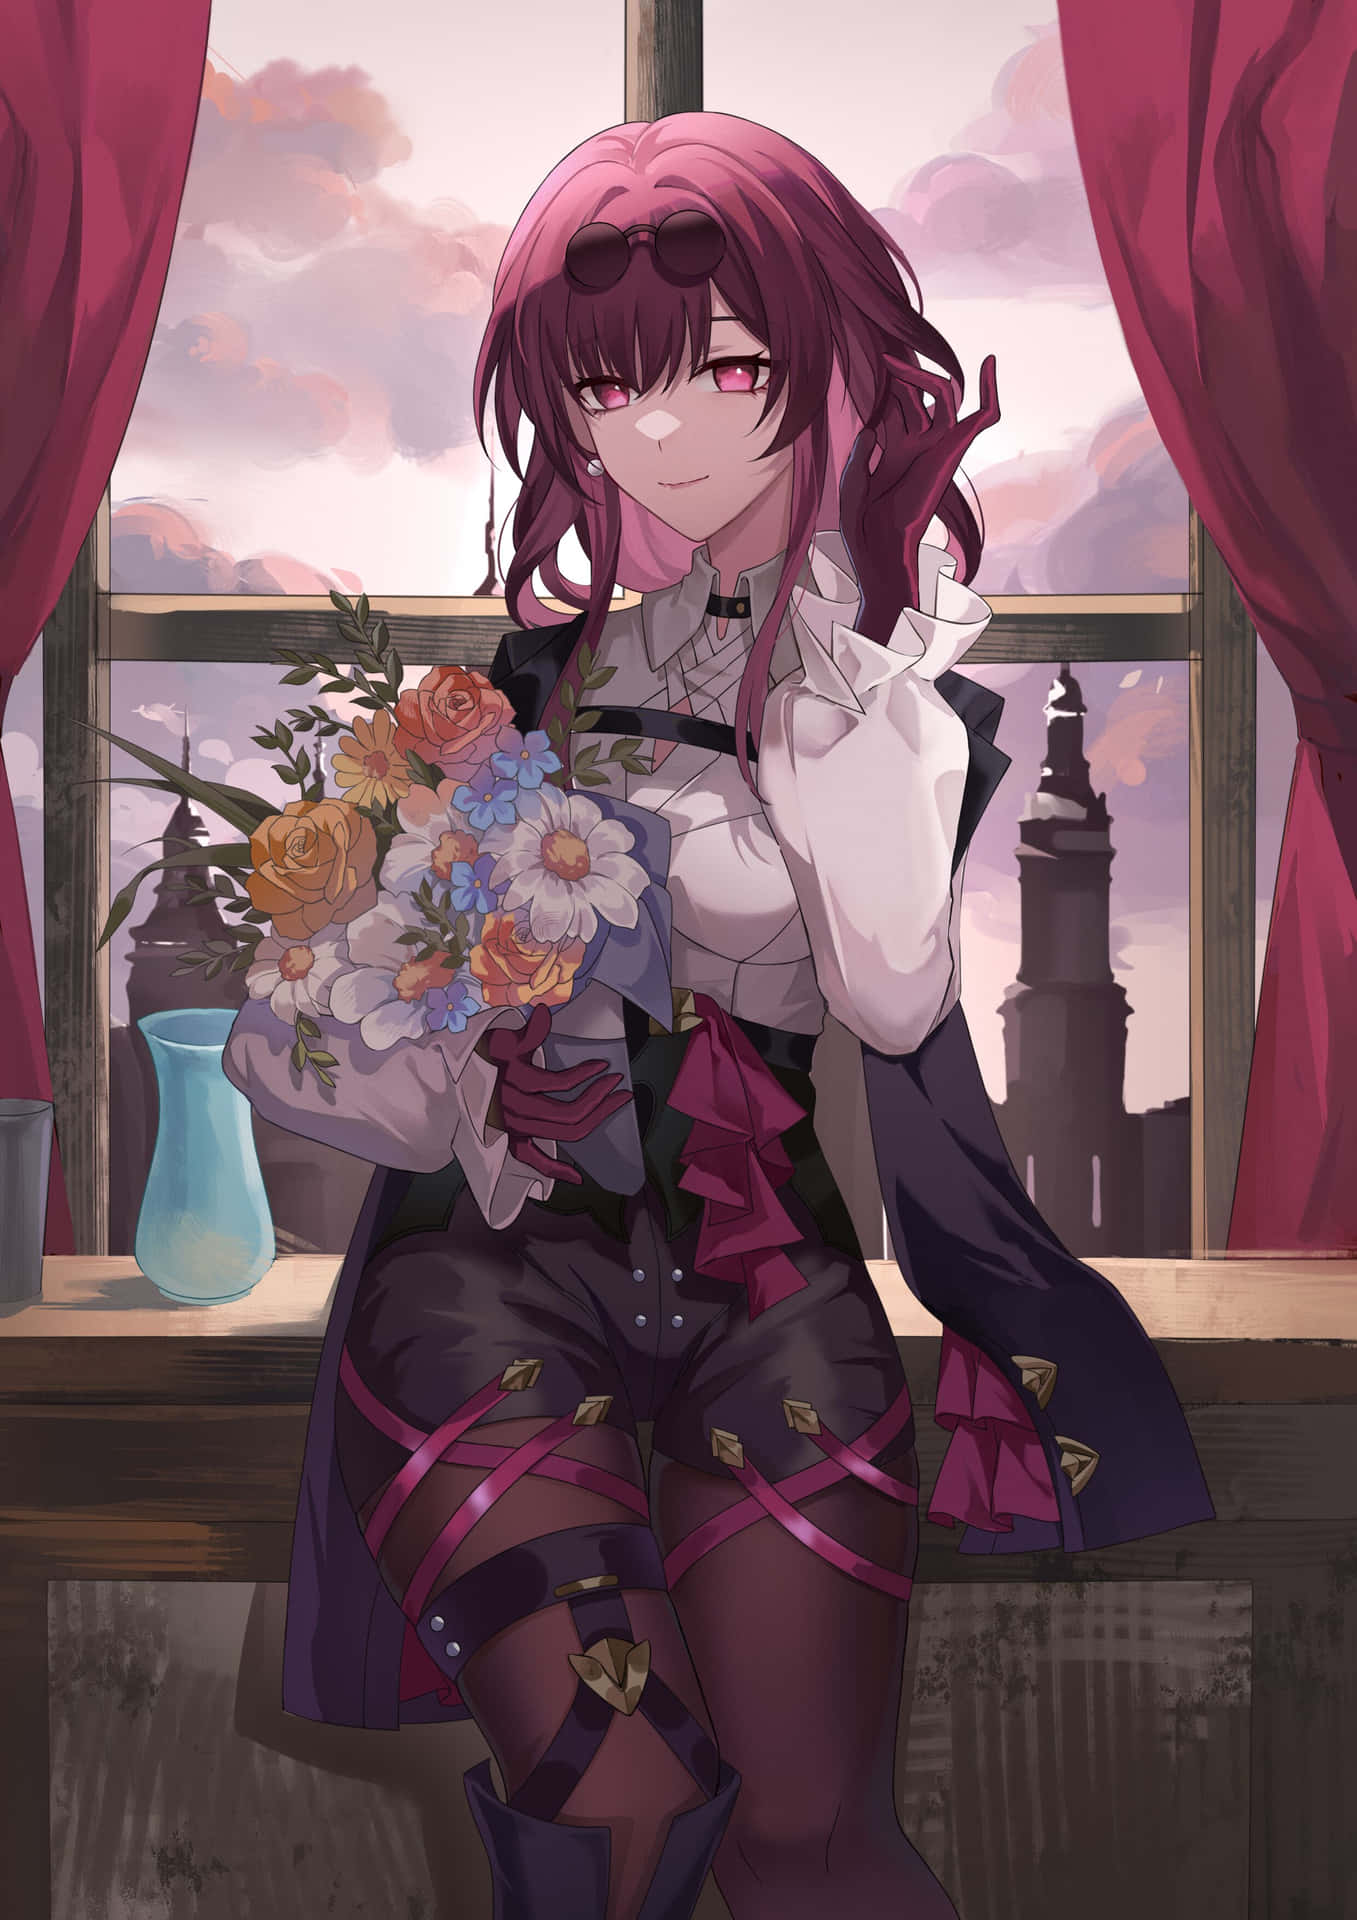 Elegant Anime Characterwith Flowers Wallpaper